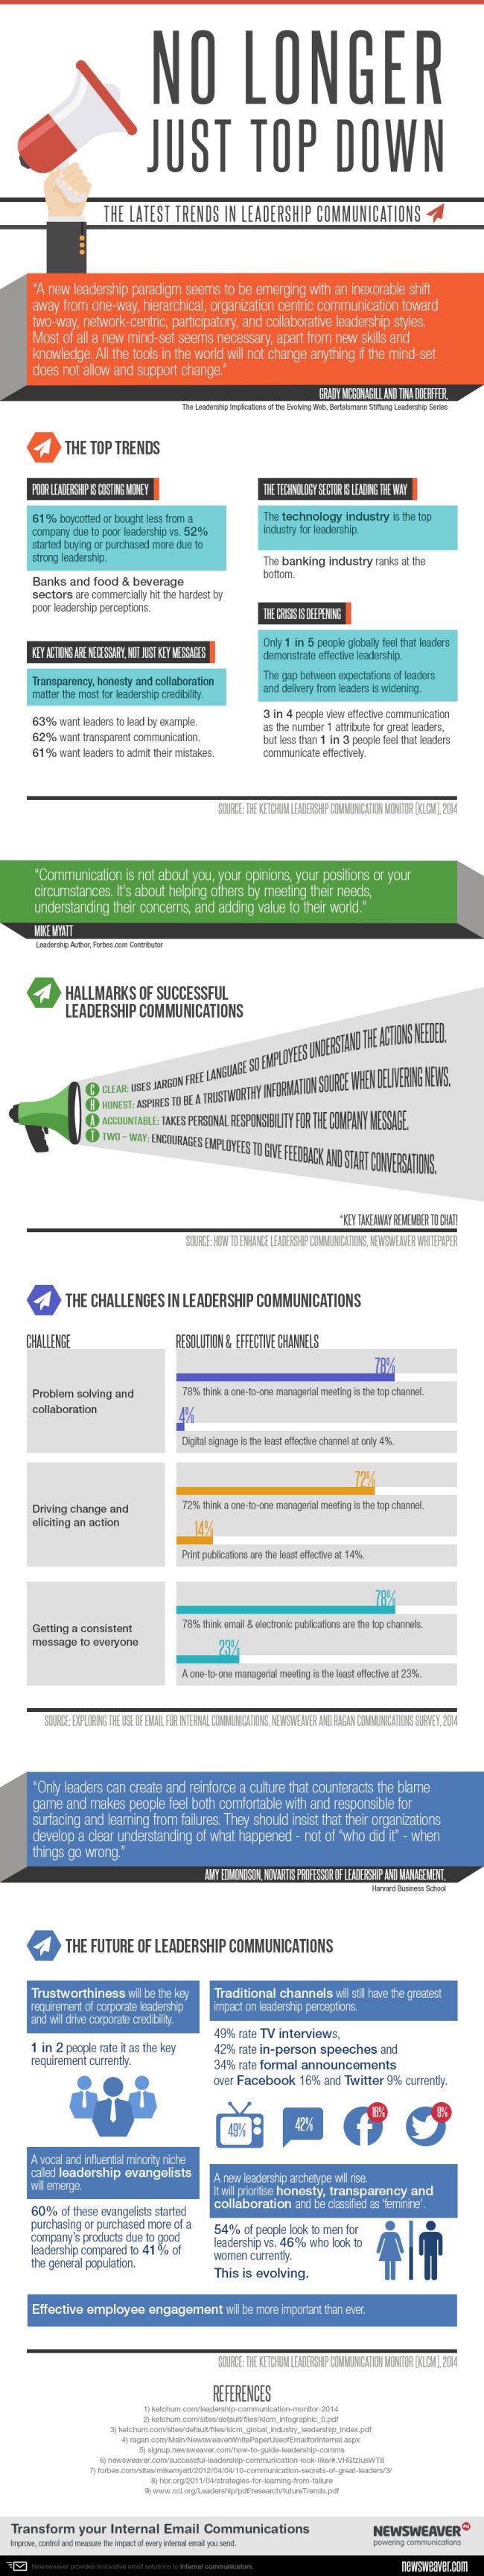 Trends in Leadership Communications